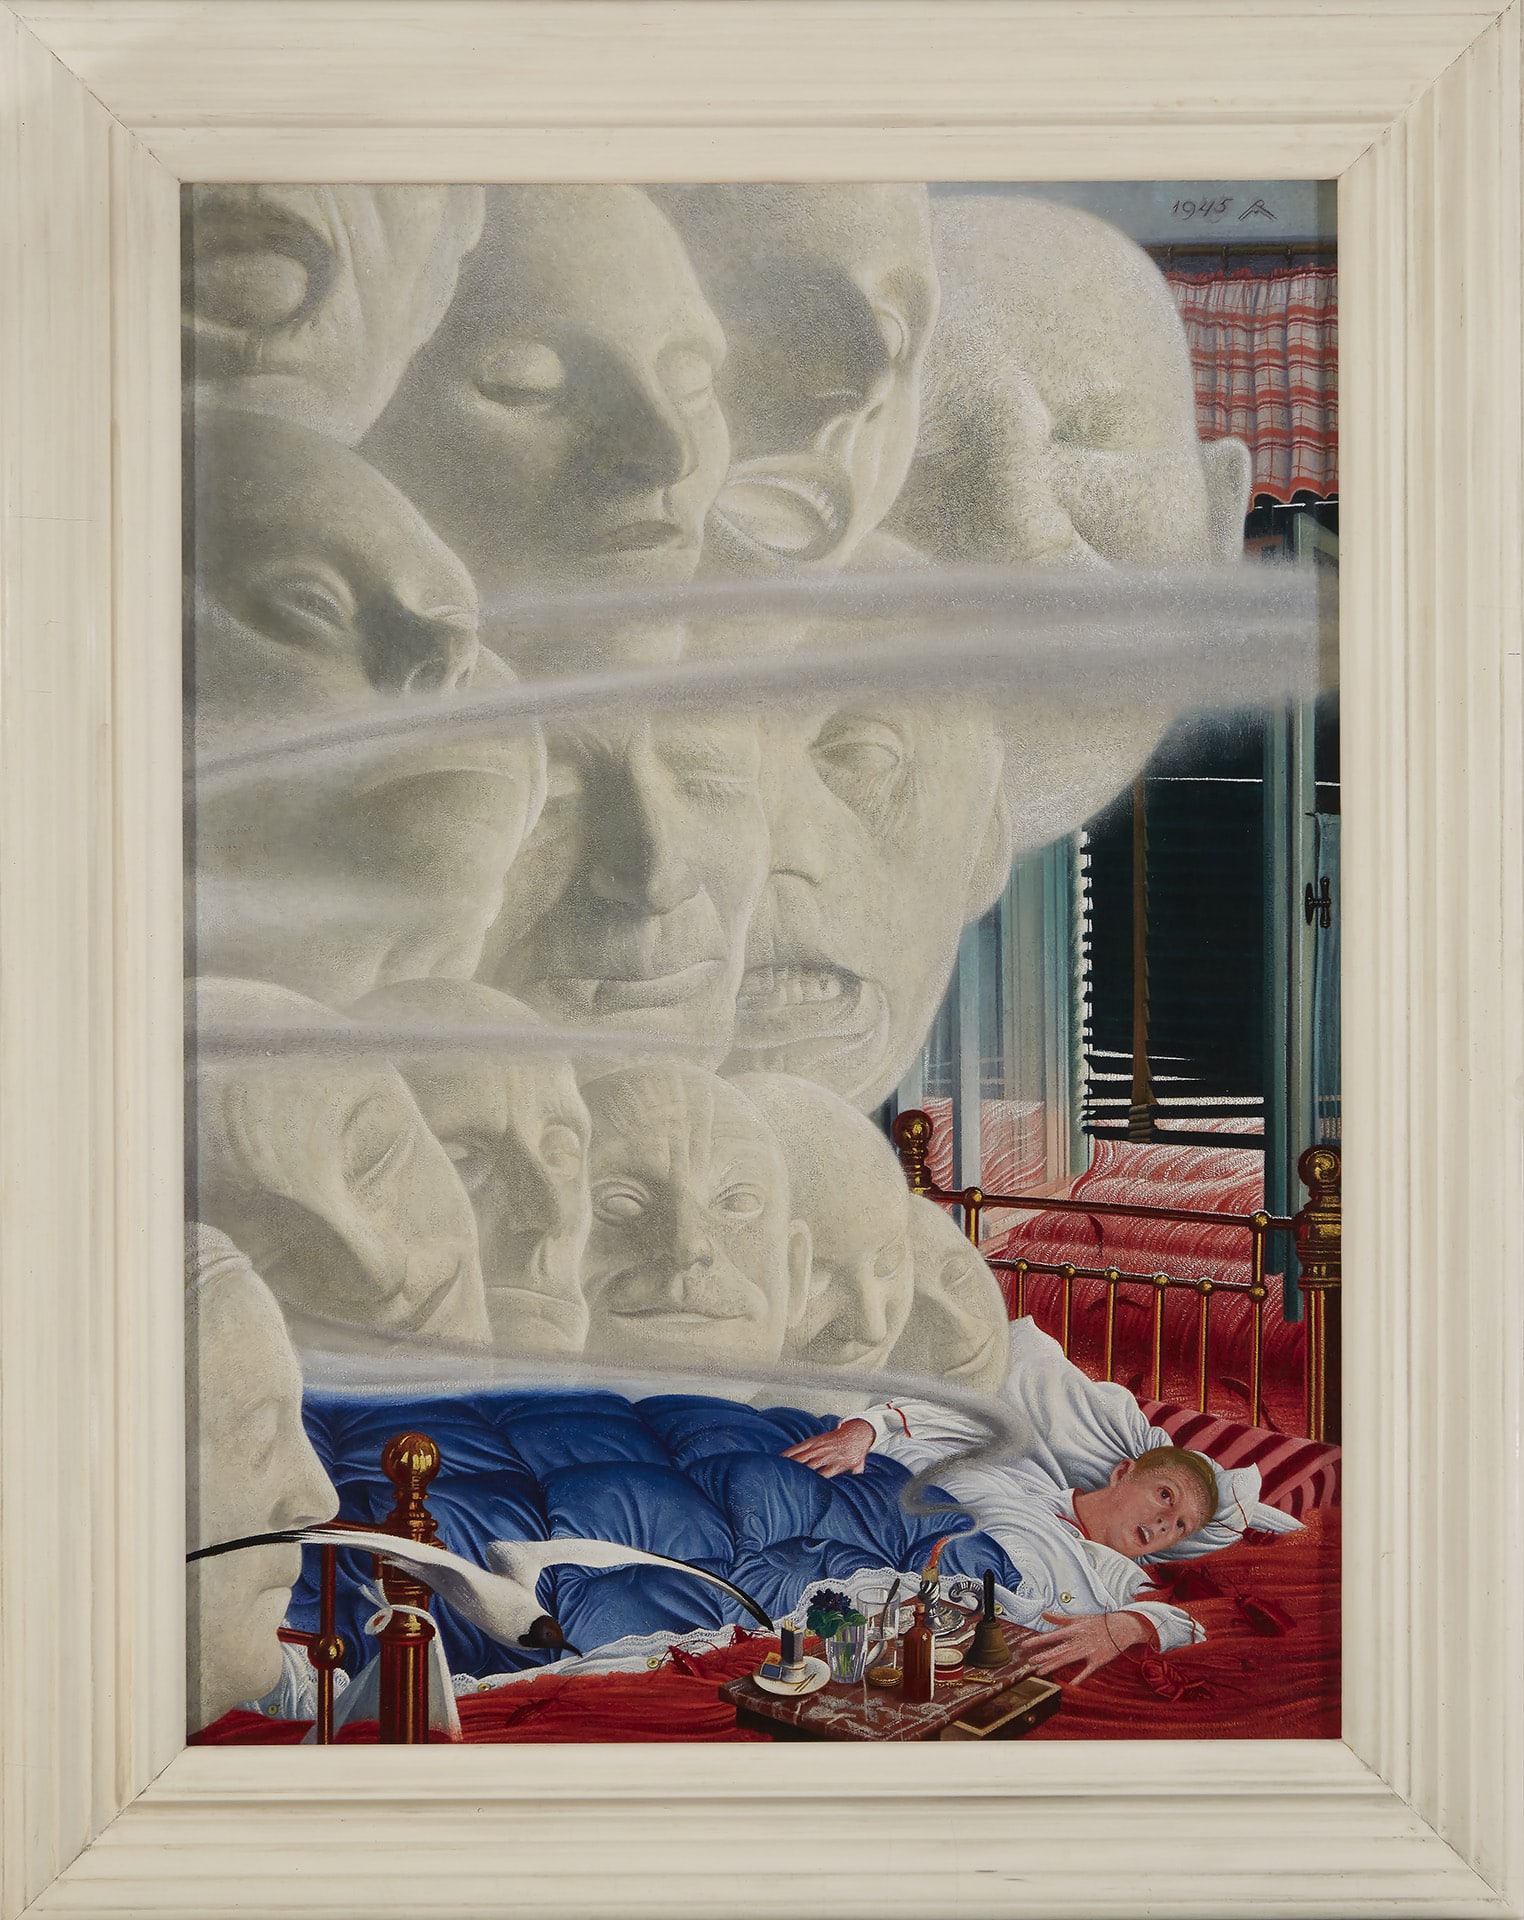 a painting of a sleeping man with a red flood coming through the window and large faces looming over him